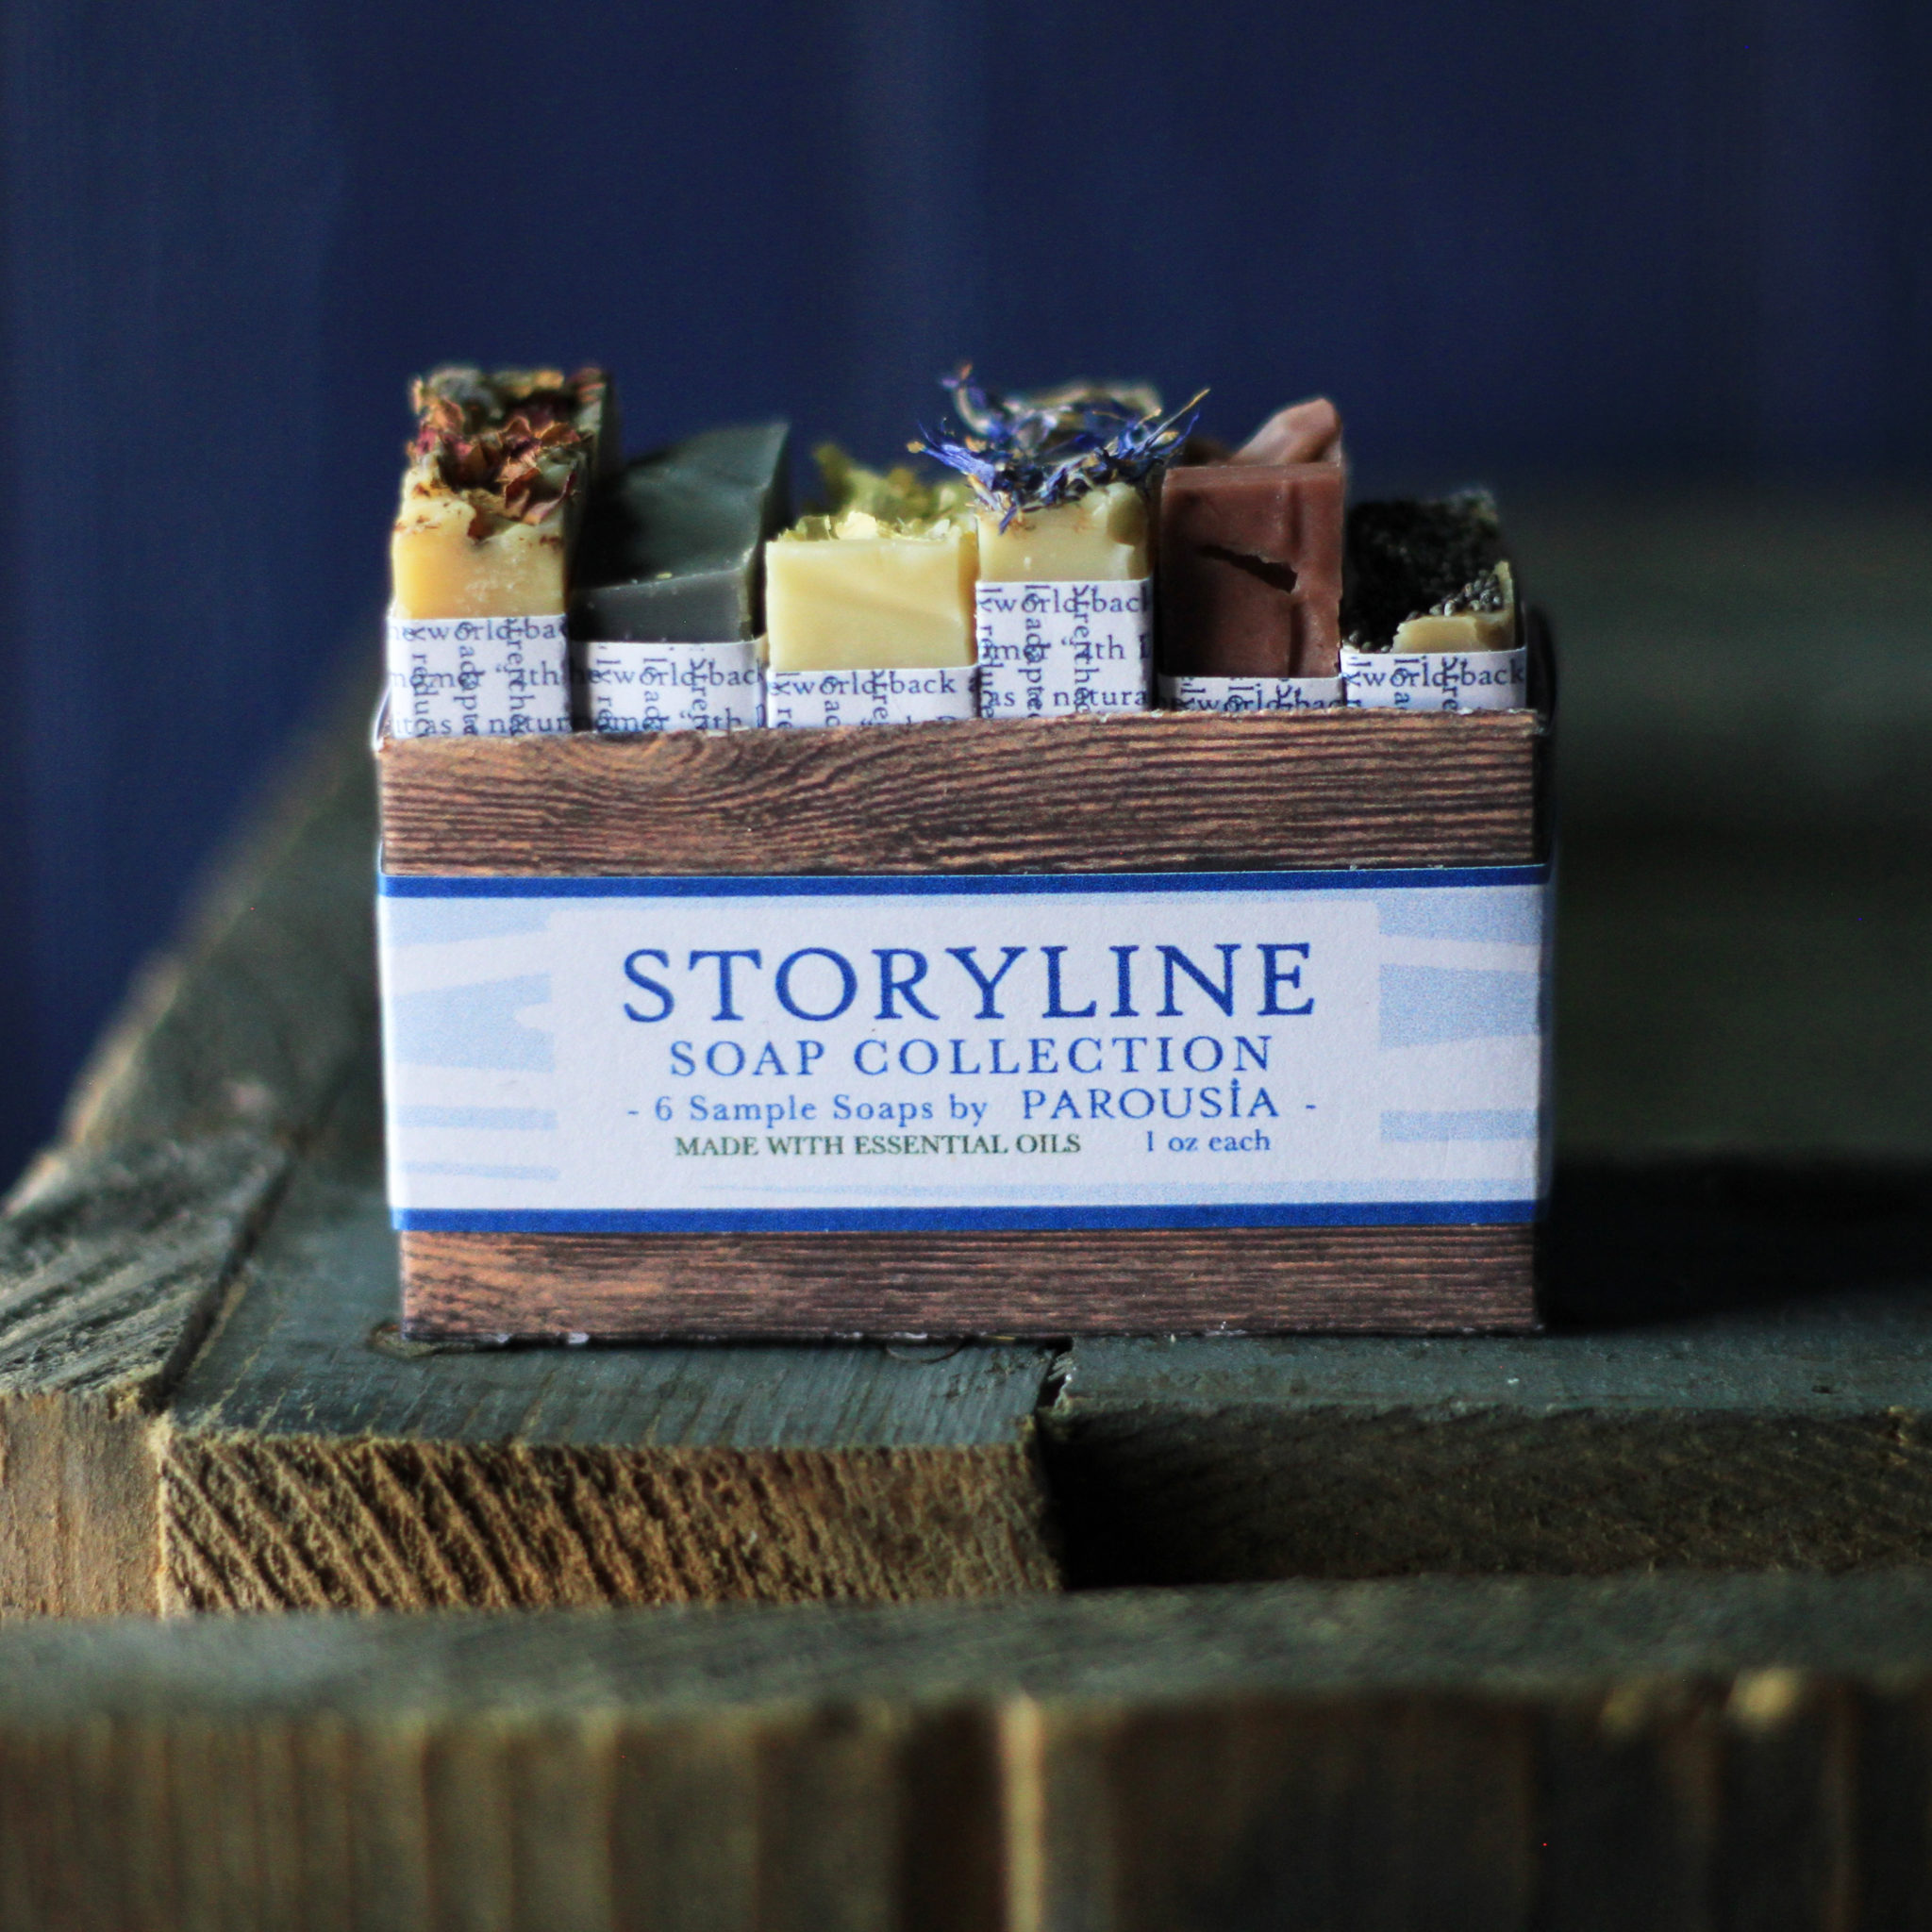 The Storyline Artisan Soap Sampler product recommended by Madeline Novak on Improve Her Health.